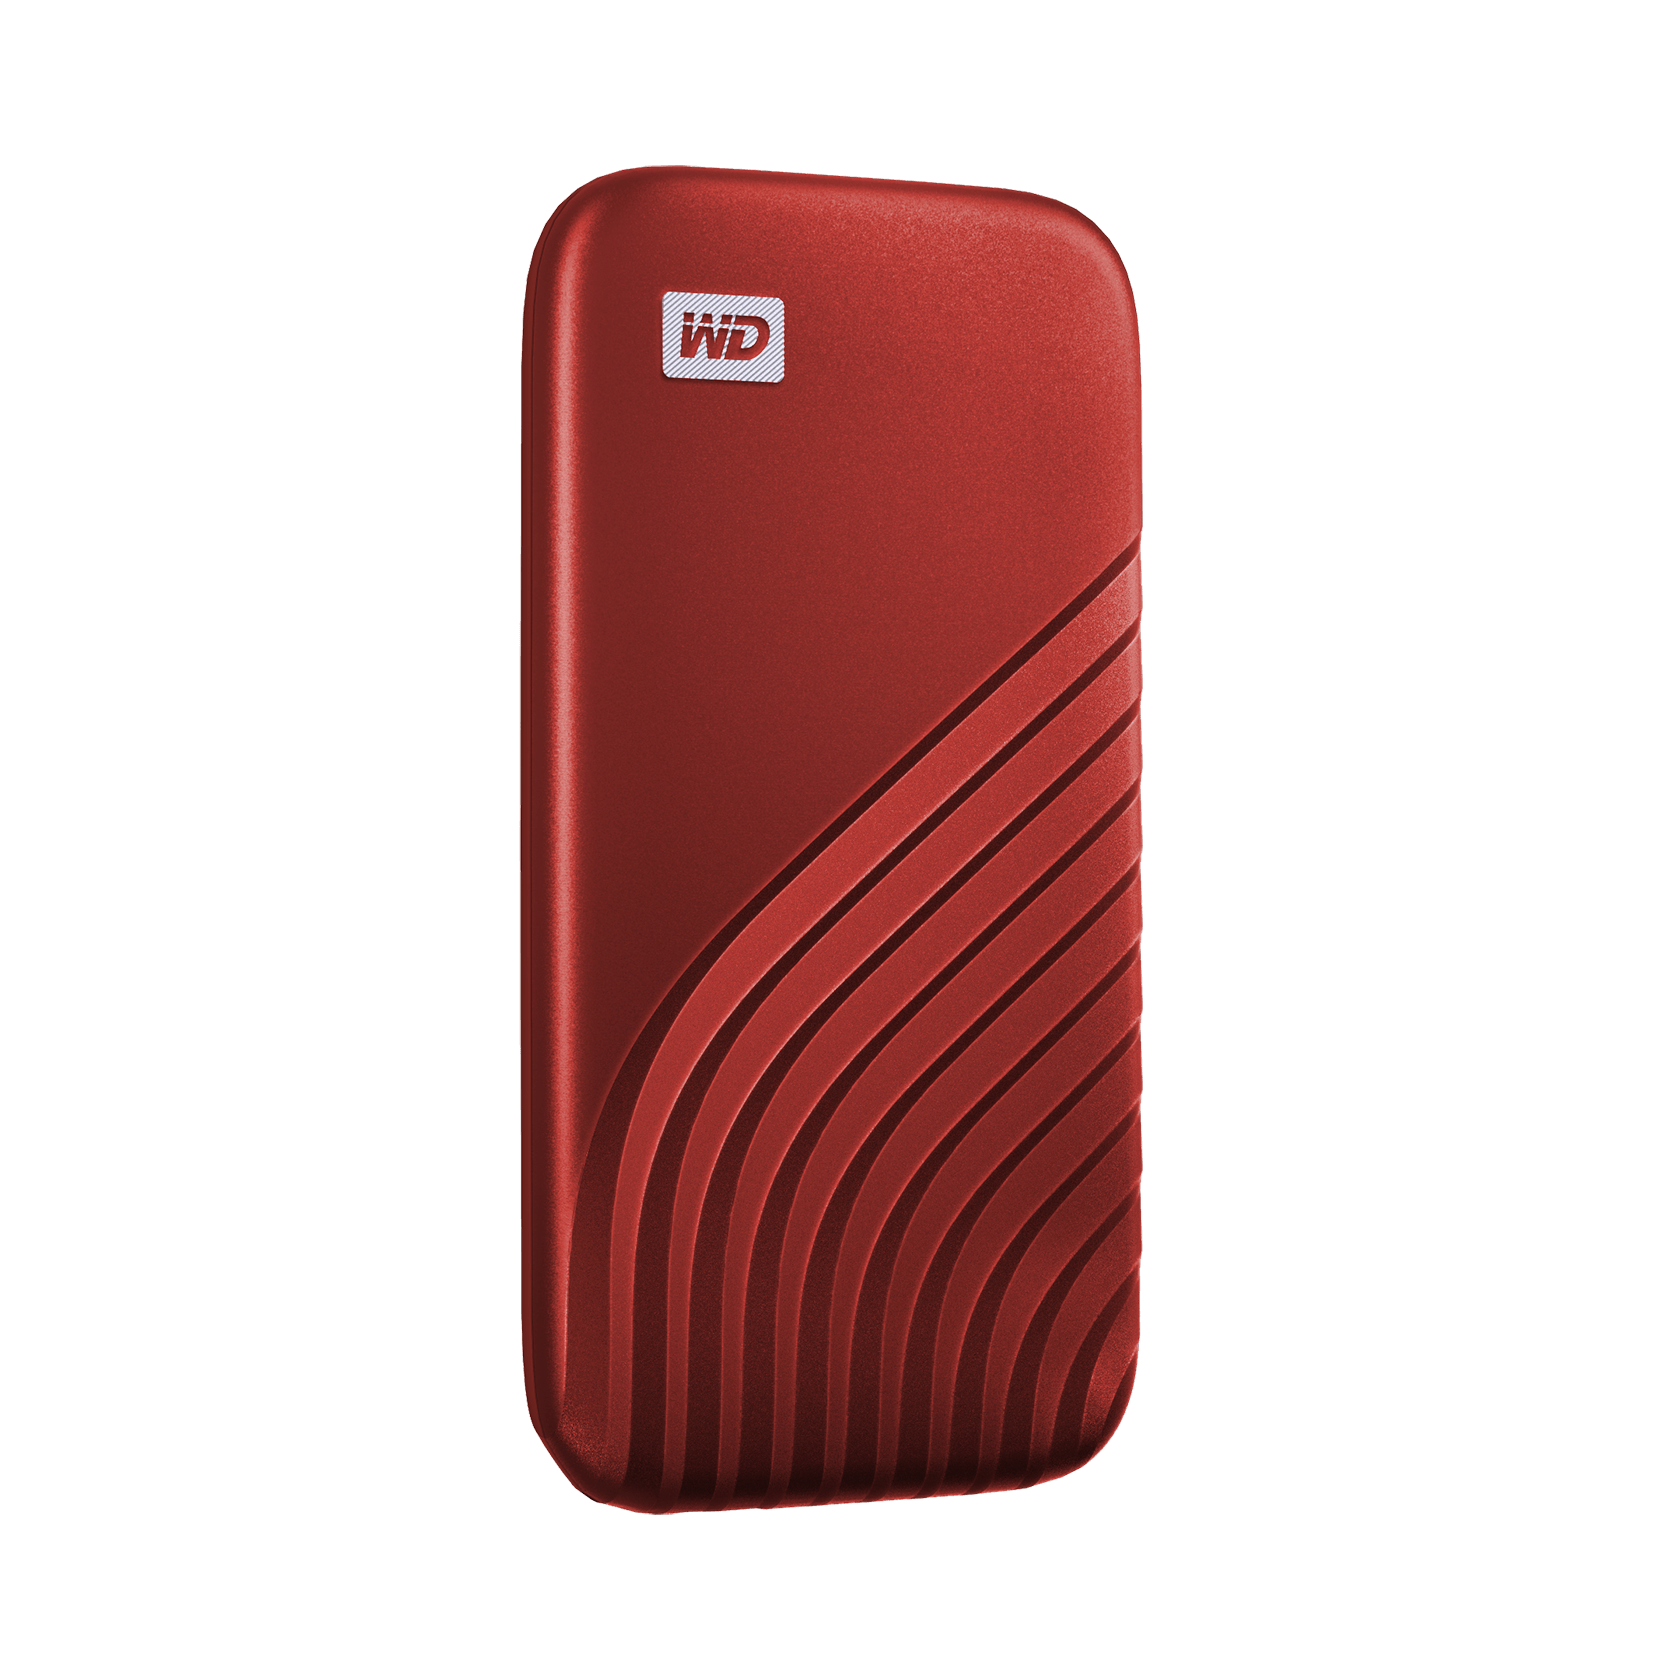 WD 1TB My Passport SSD, Portable External Solid State Drive, Red - WDBAGF0010BRD-WESN - image 2 of 8